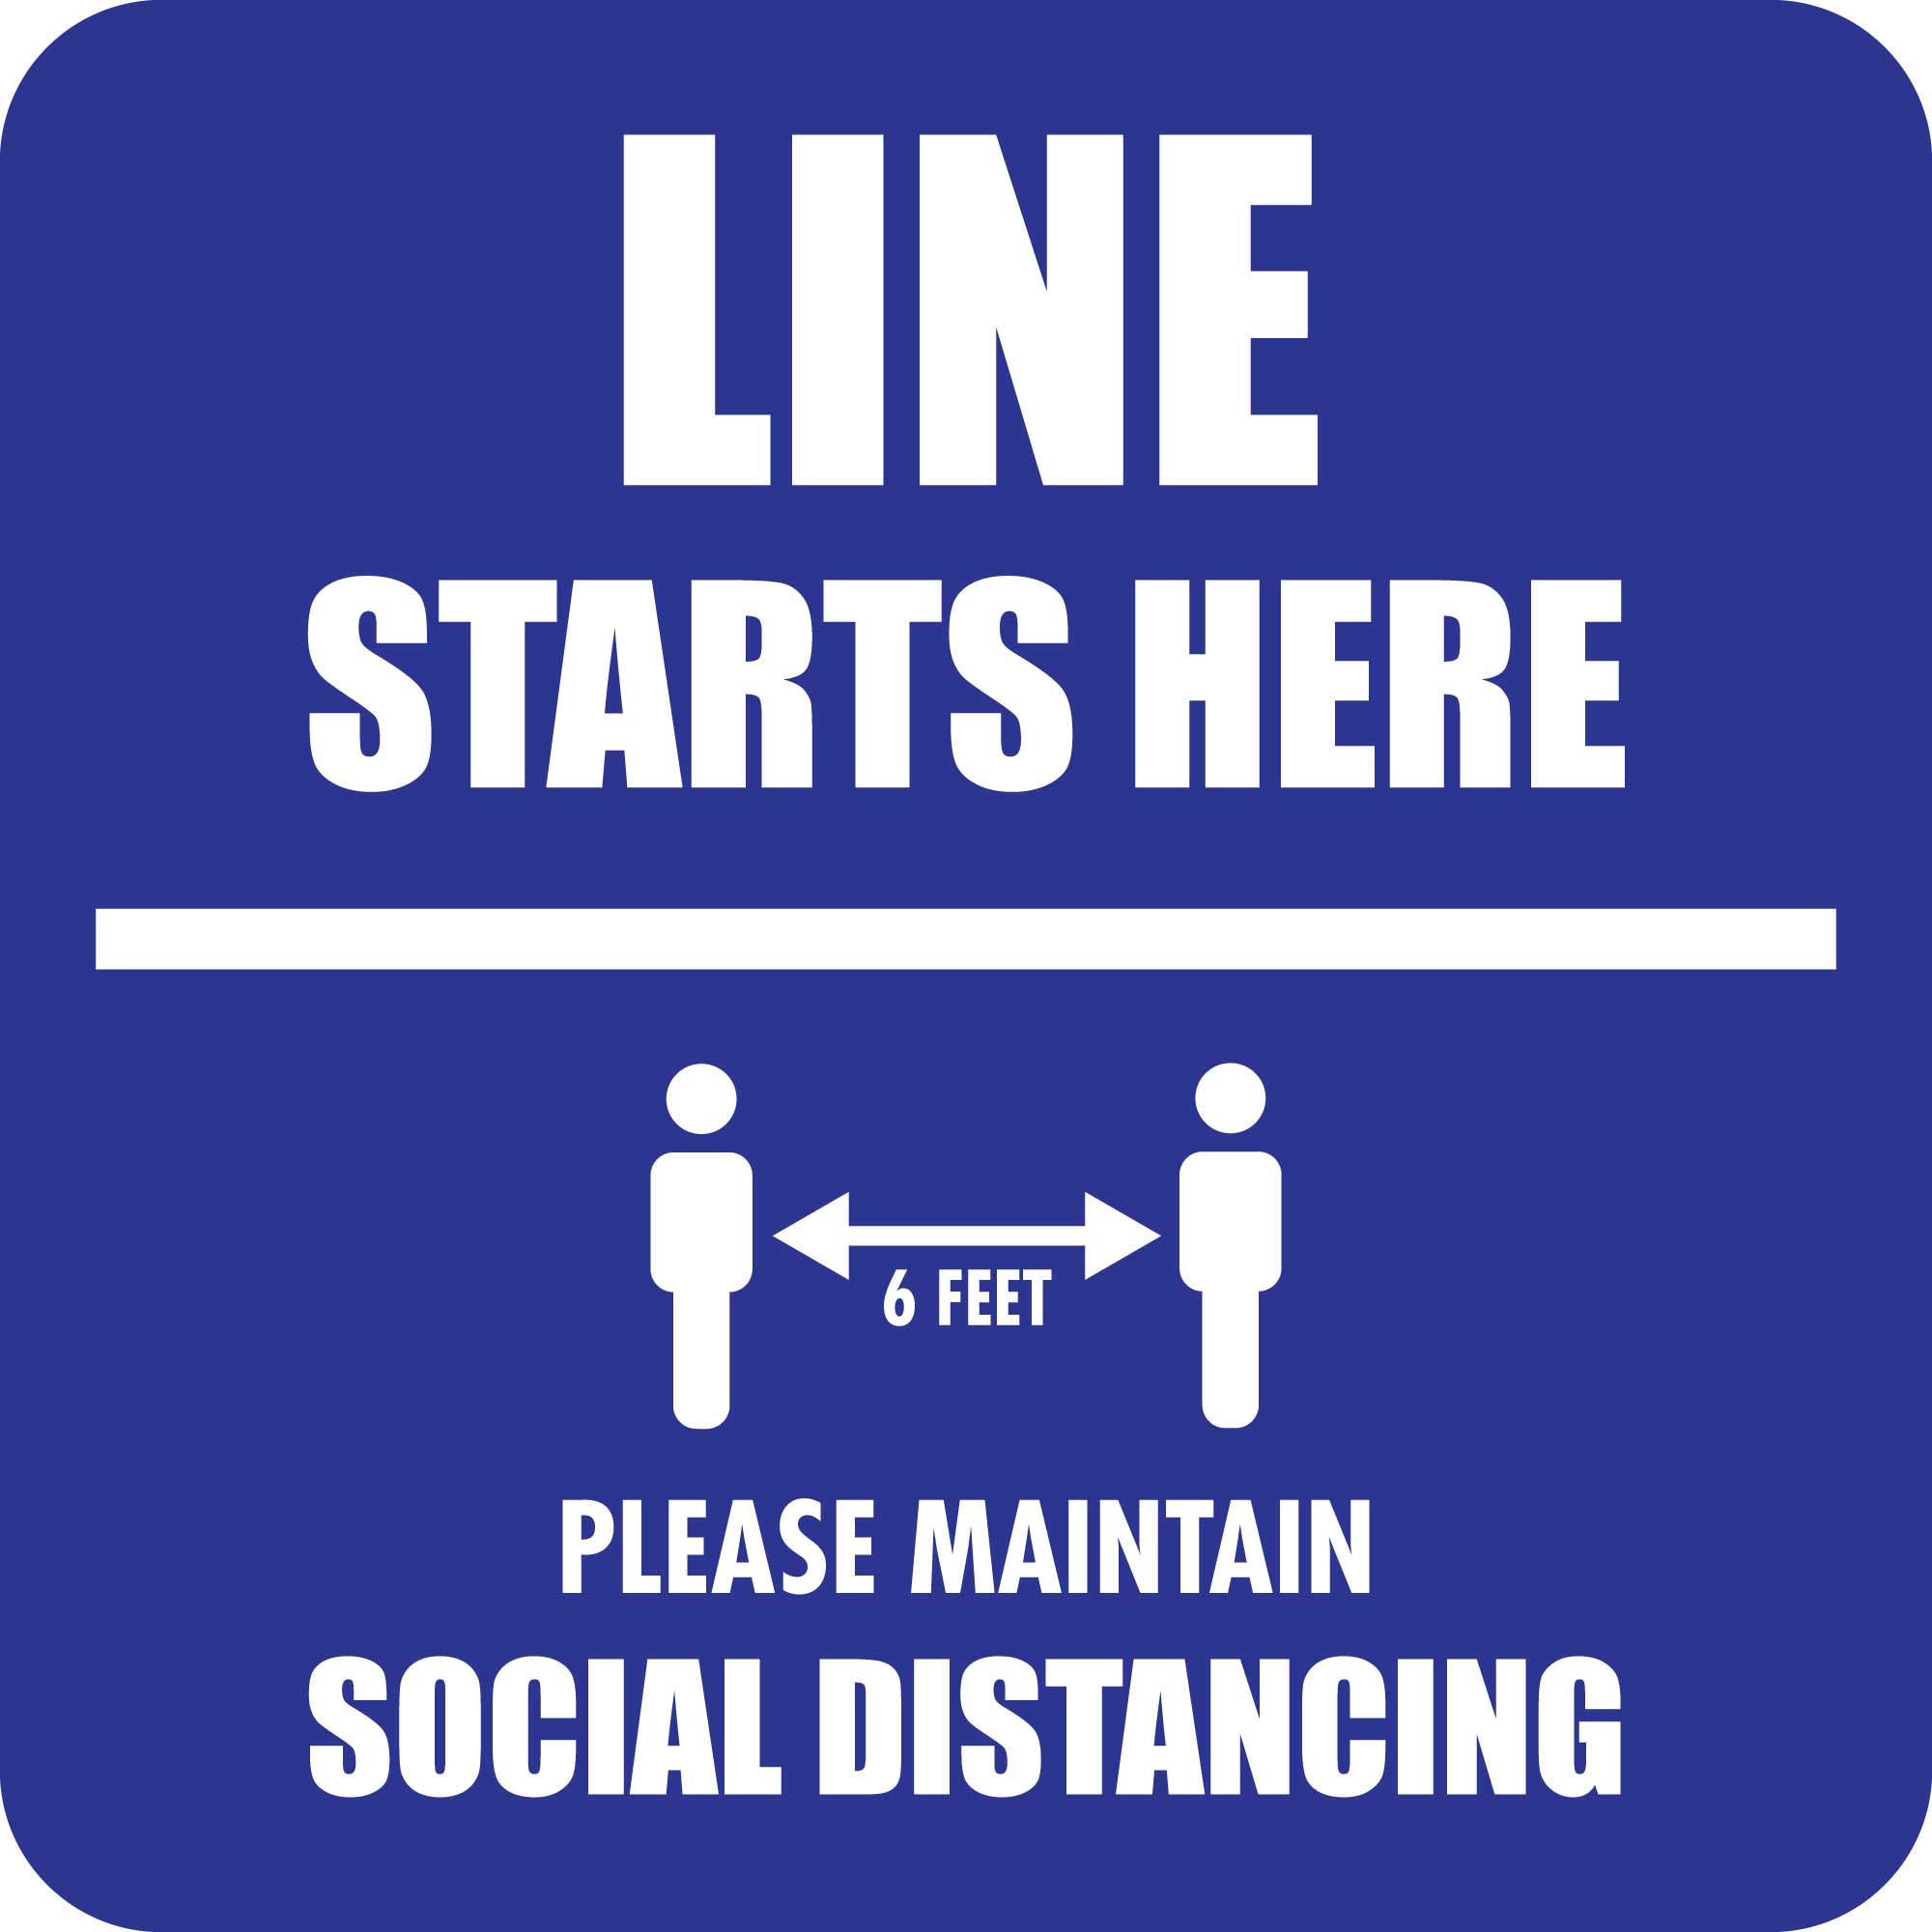 Social Distancing Floor Sticker Decals LAMINATED Large sizes A5 A4 A3 A2 